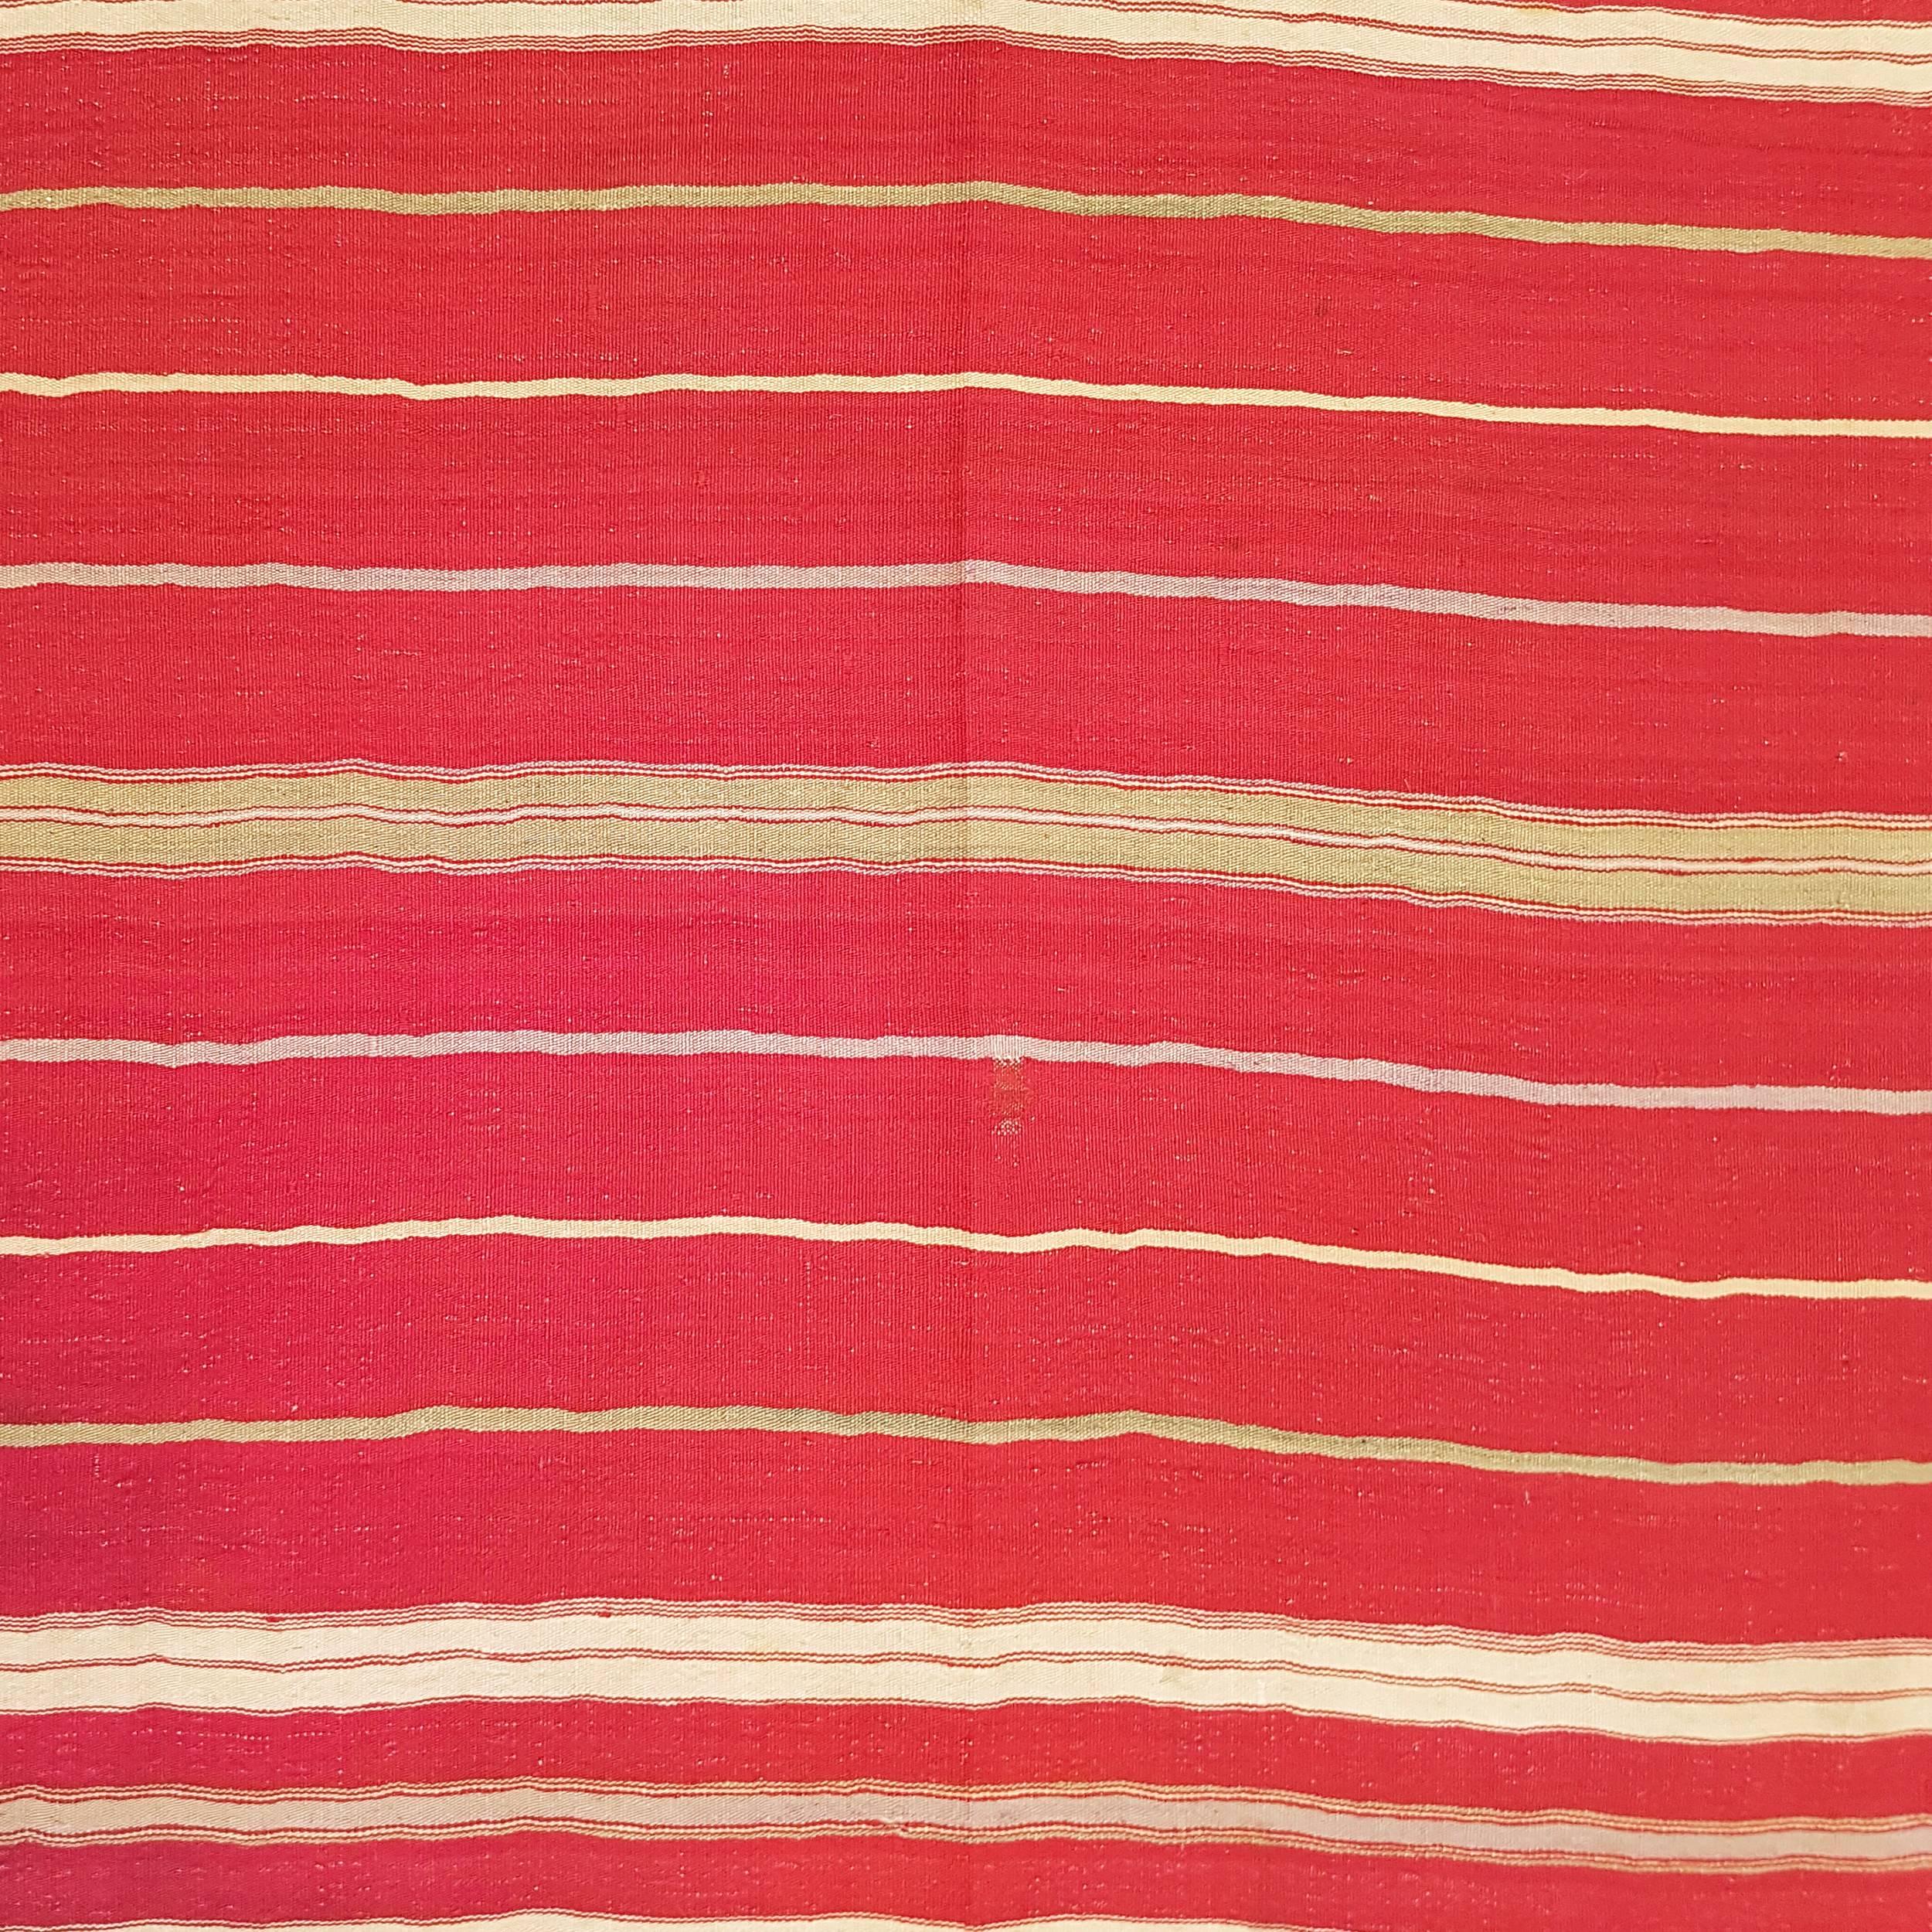 A very rare and unusual flat-weave, extremely finely woven with silky wool, decorated by an asymmetrical array of horizontal stripes on a rich red background, save for the lower third of the field which is in ivory.
A textile imbued with a strong